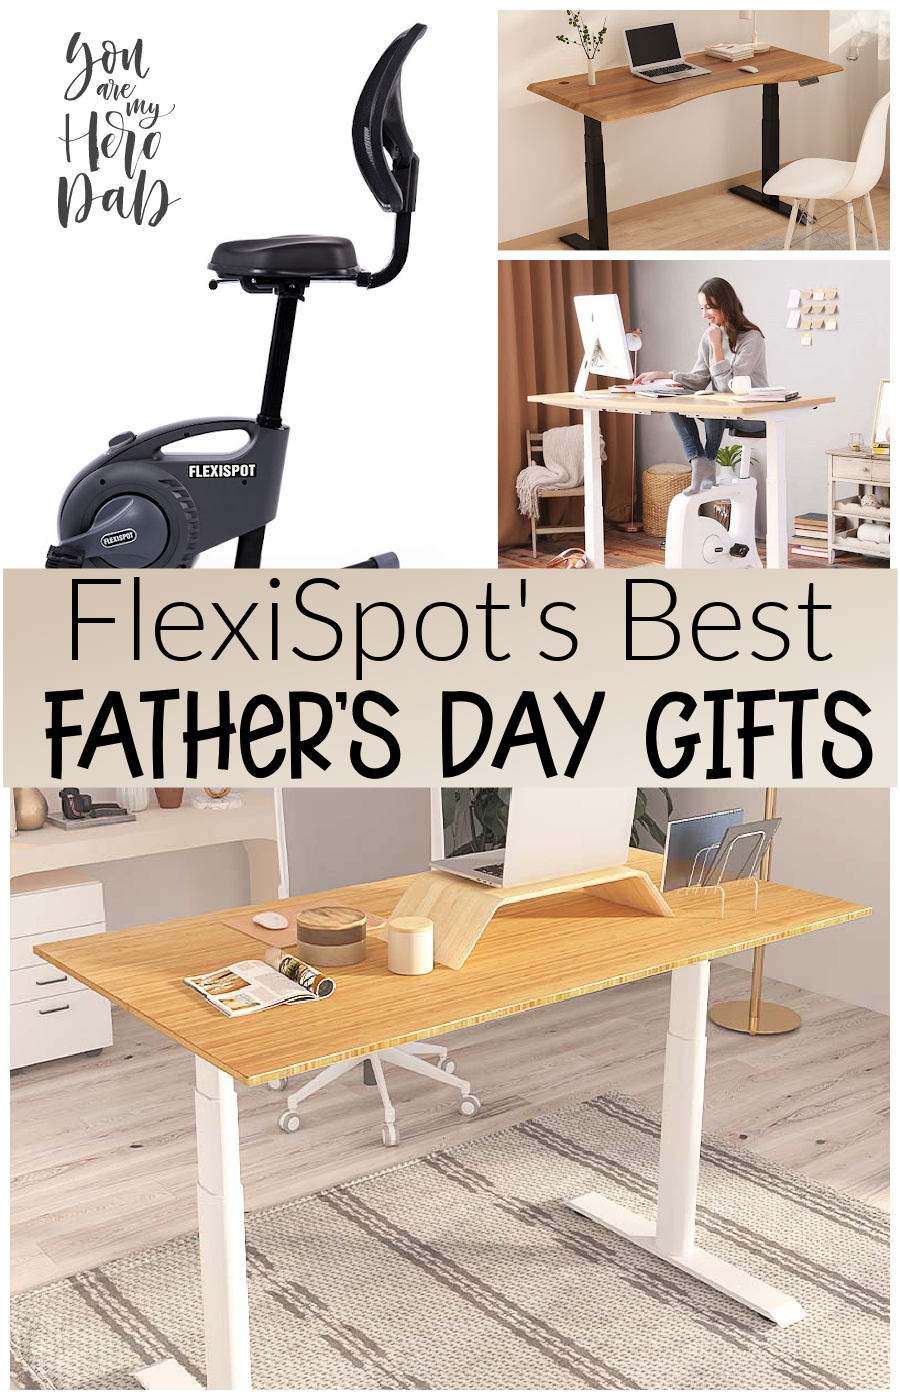 FlexiSpot's Best Father's Day Gifts #SuperDadGifts